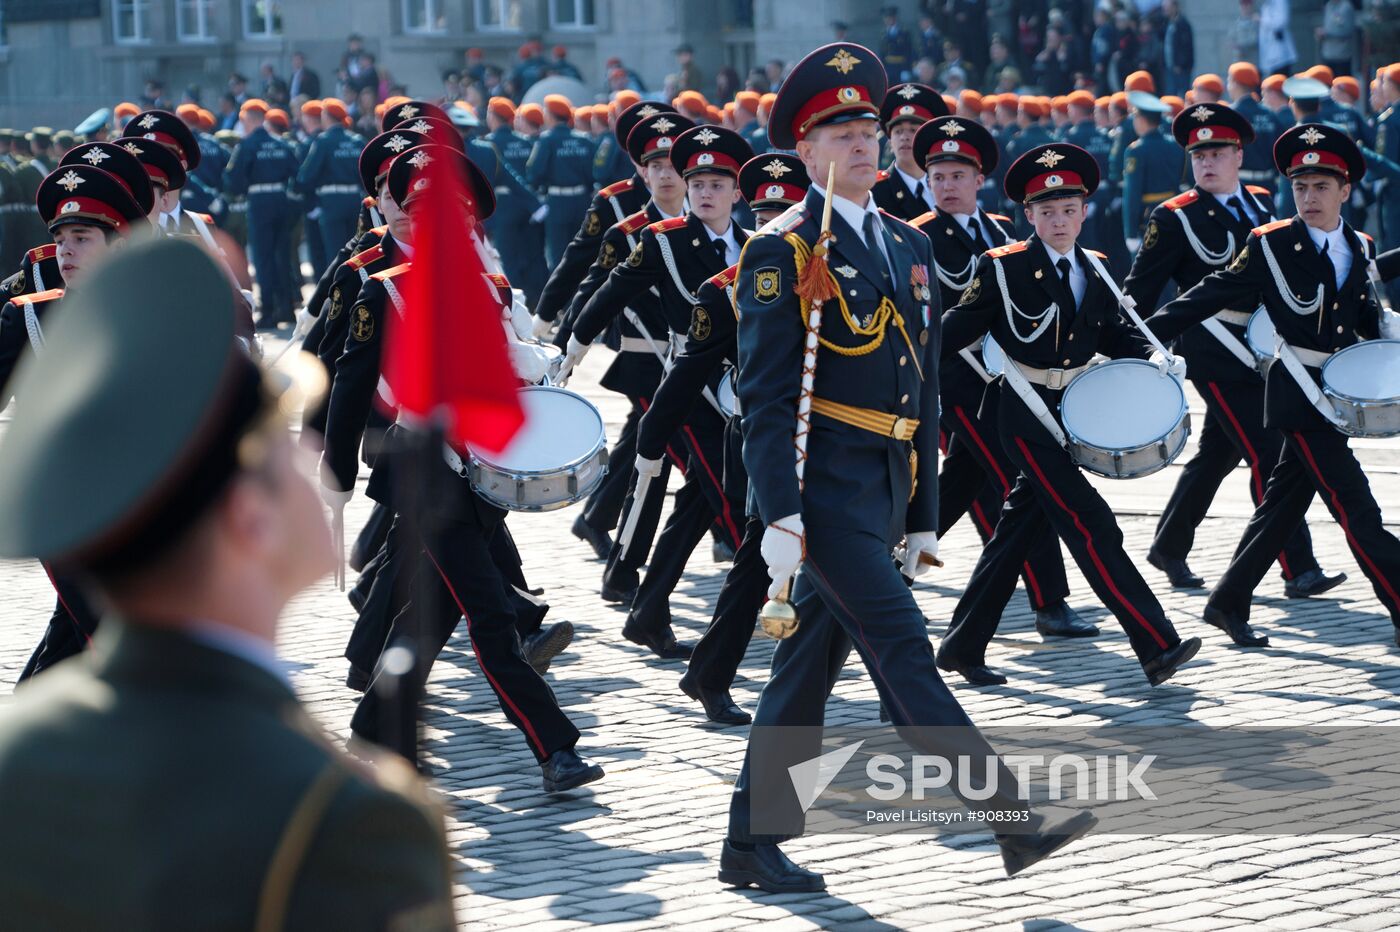 Victory Day parade in Russian regions